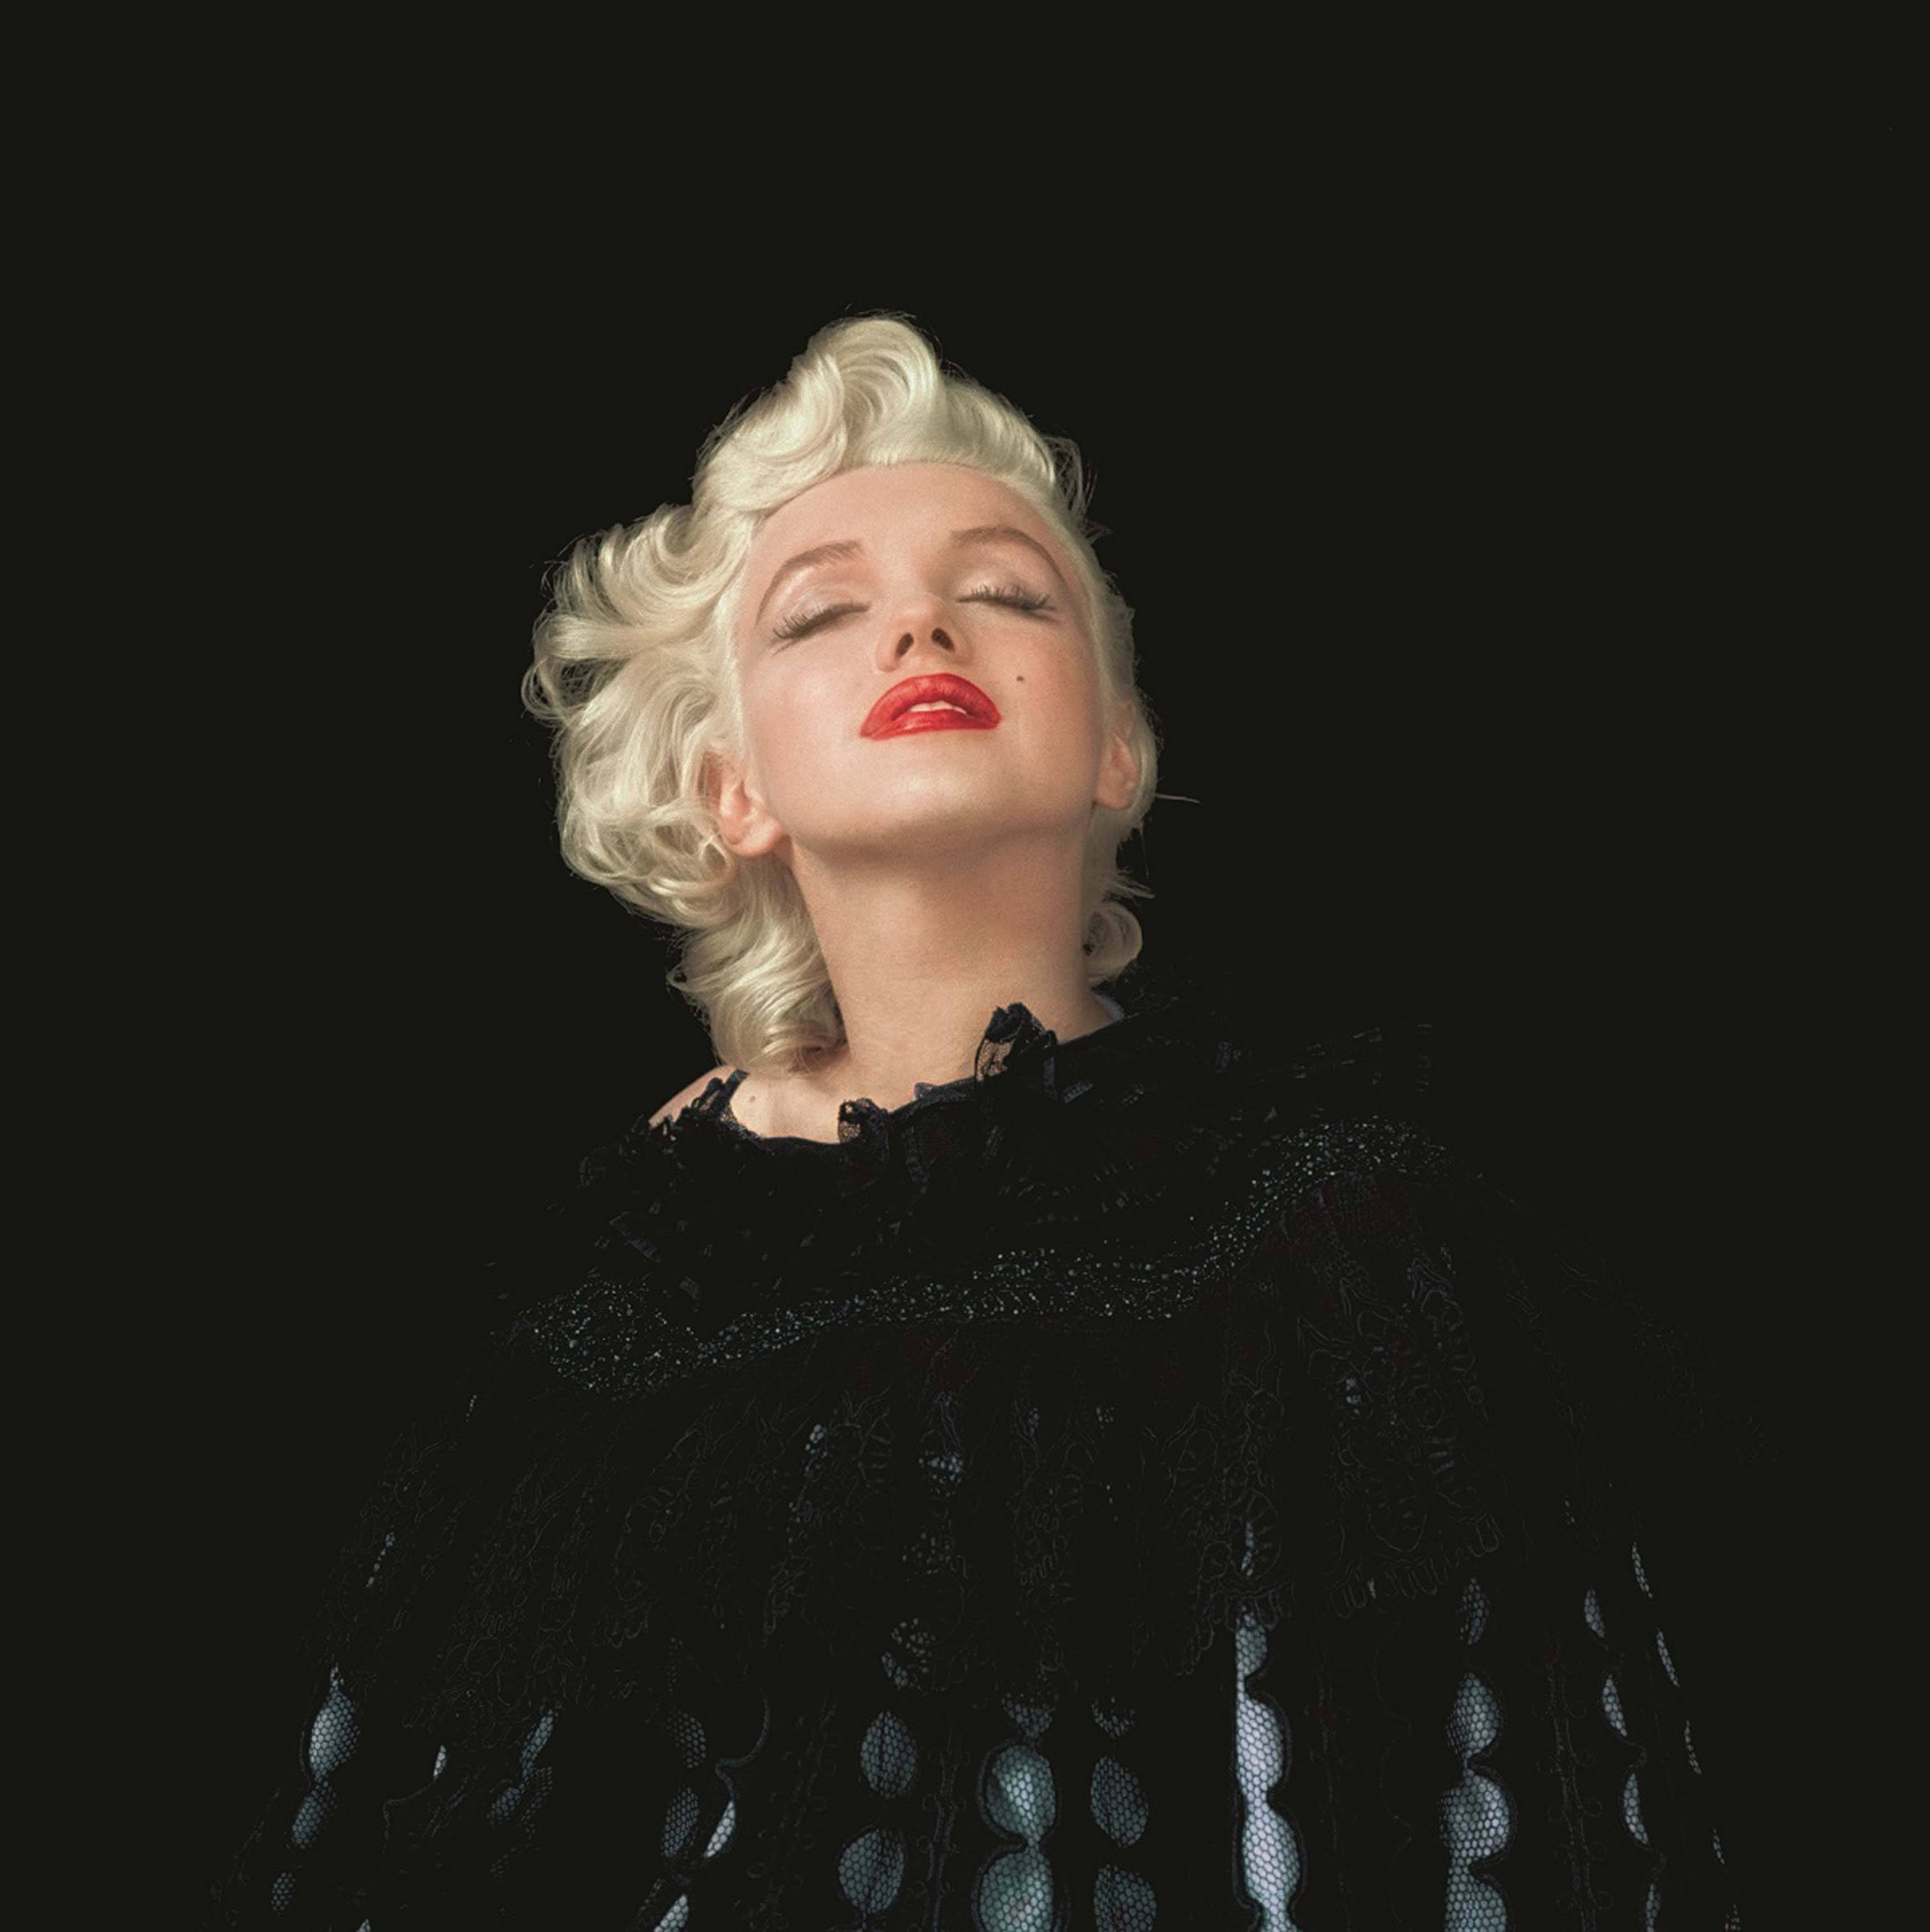 Photographed by Milton H. Greene - The Essential Marilyn Monroe, published by ACC Editions ©2017 Joshua 